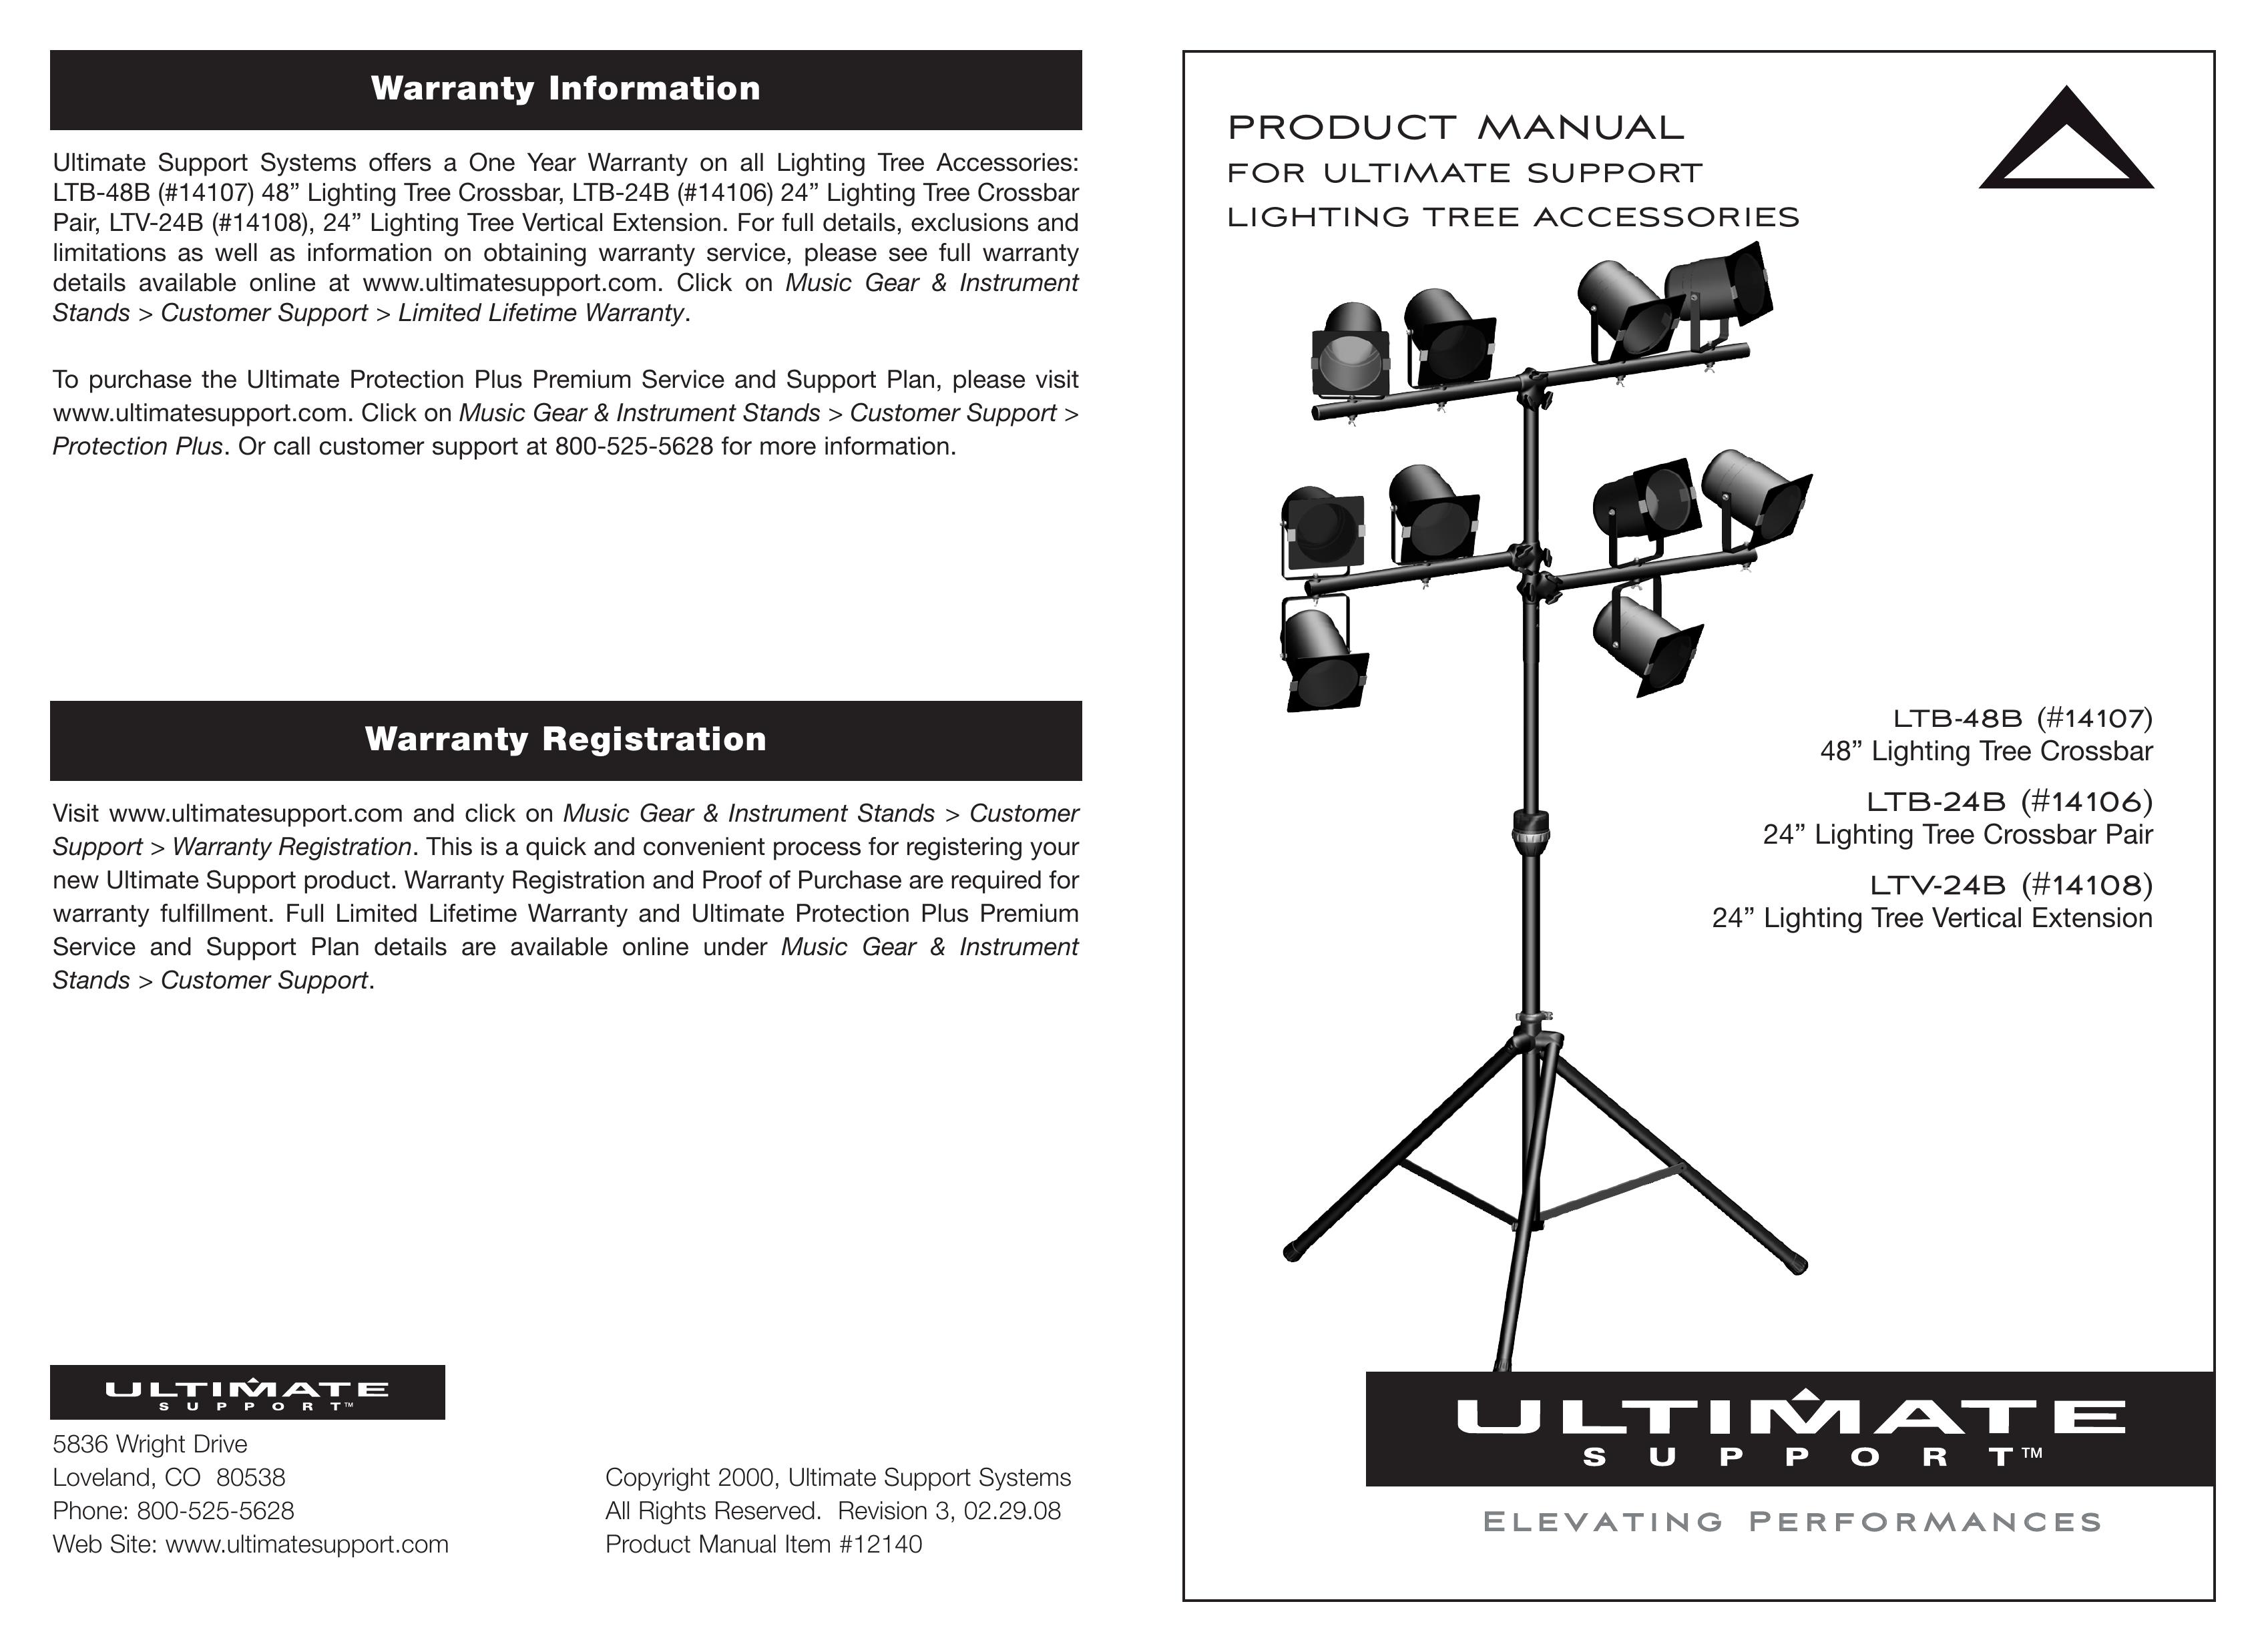 Ultimate Support Systems 14107 Marine Lighting User Manual